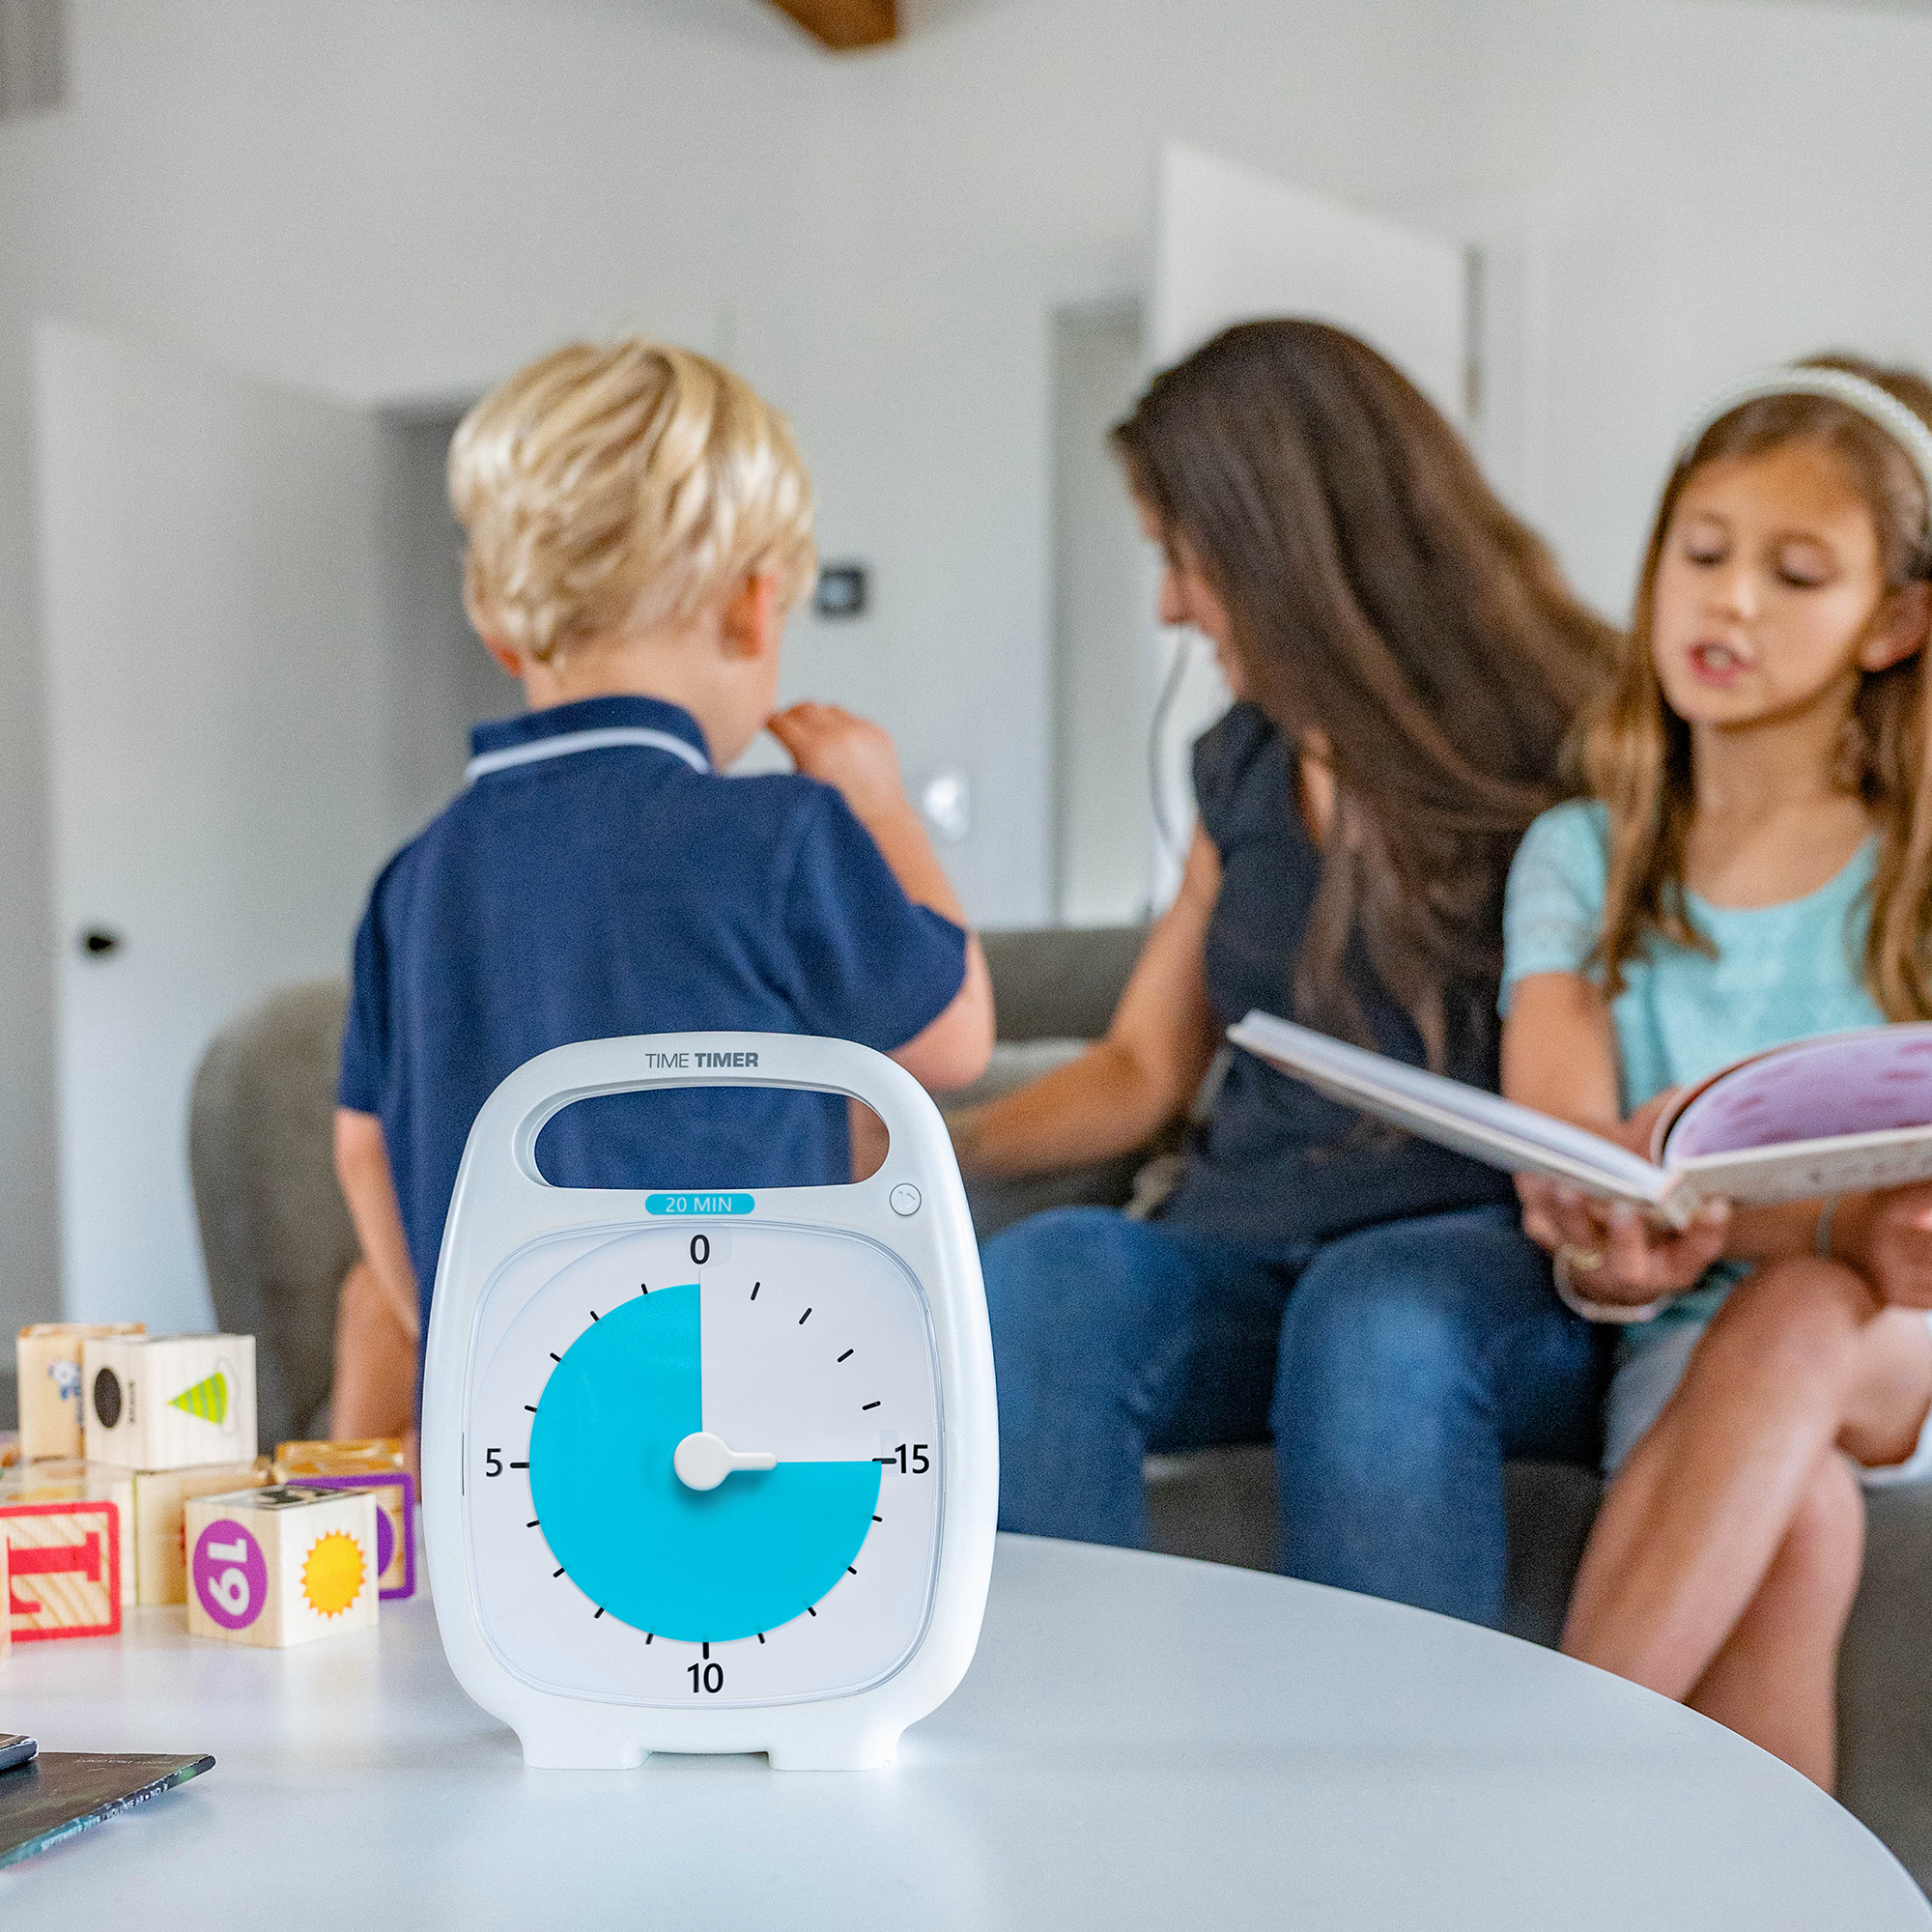 A Time Timer PLUS 20 minute visual timer is sitting on a table in a living room. It's blue disk is set to 15 minutes. In the background, a mom and two kids are on the couch, reading books and talking. There a play blocks sitting on the table next to the timer.